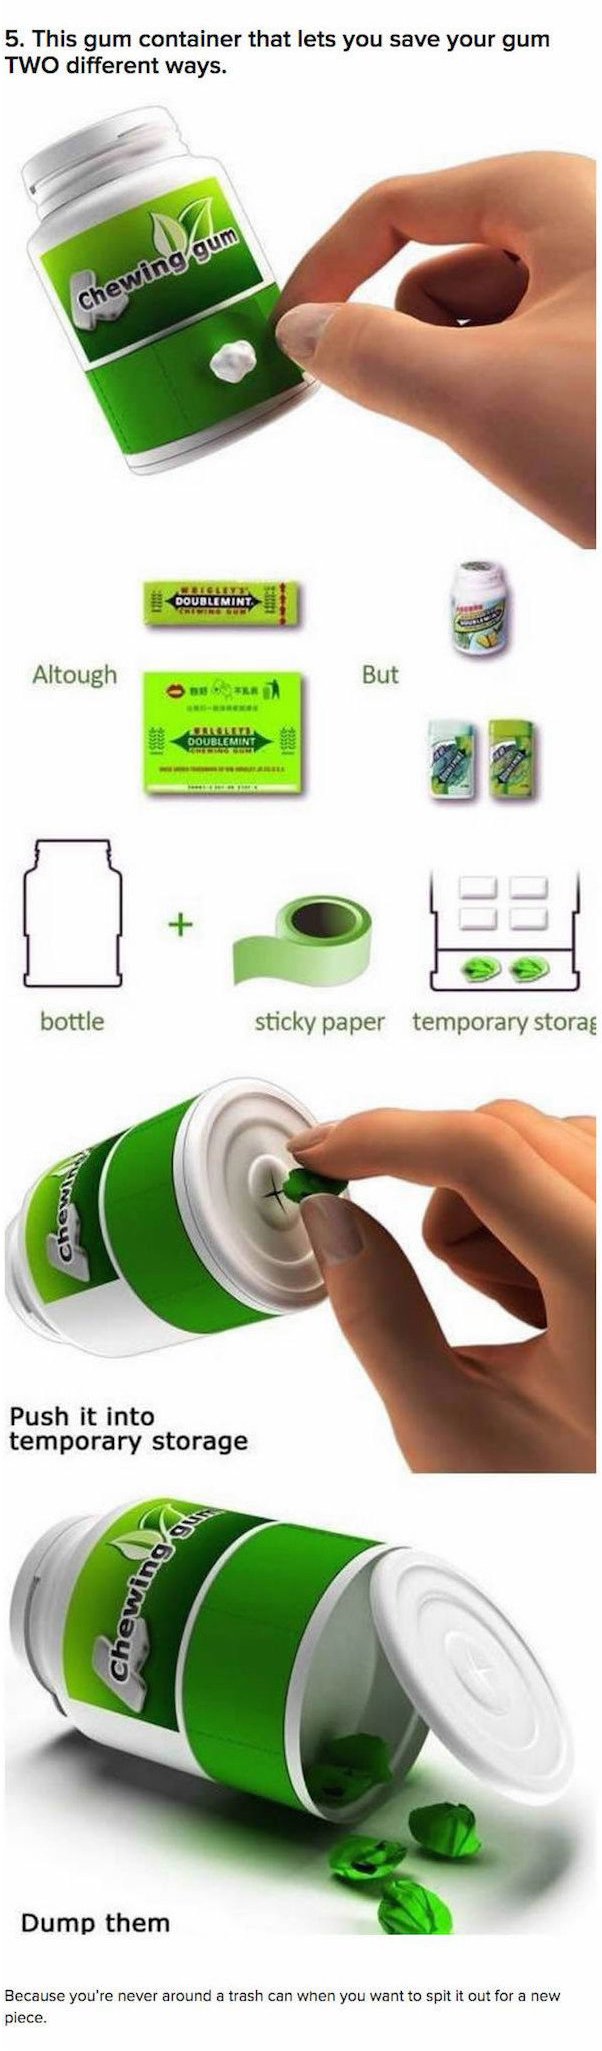 chewing gum - 5. This gum container that lets you save your gum Two different ways. chewing.cum Doublemint Doublemint Altough But Ra Doublement bottle sticky paper temporary storag chew Push it into temporary storage chewin Dump them Because you're never 